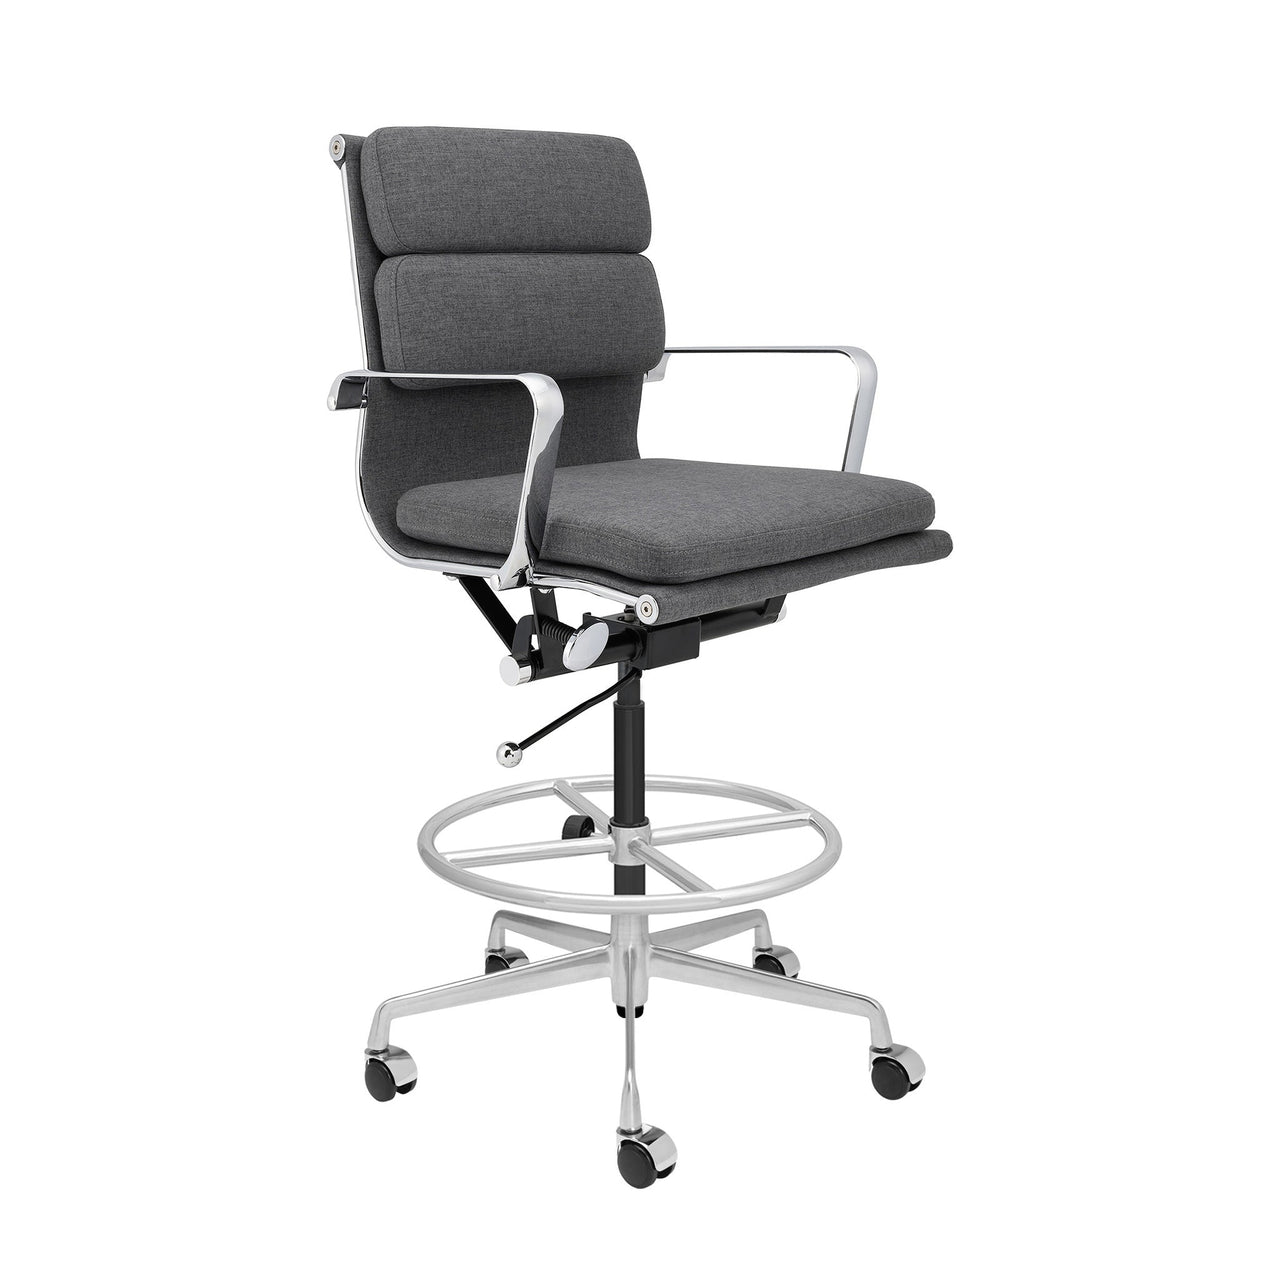 Classic SOHO Soft Padded Drafting Chair (Charcoal Fabric)